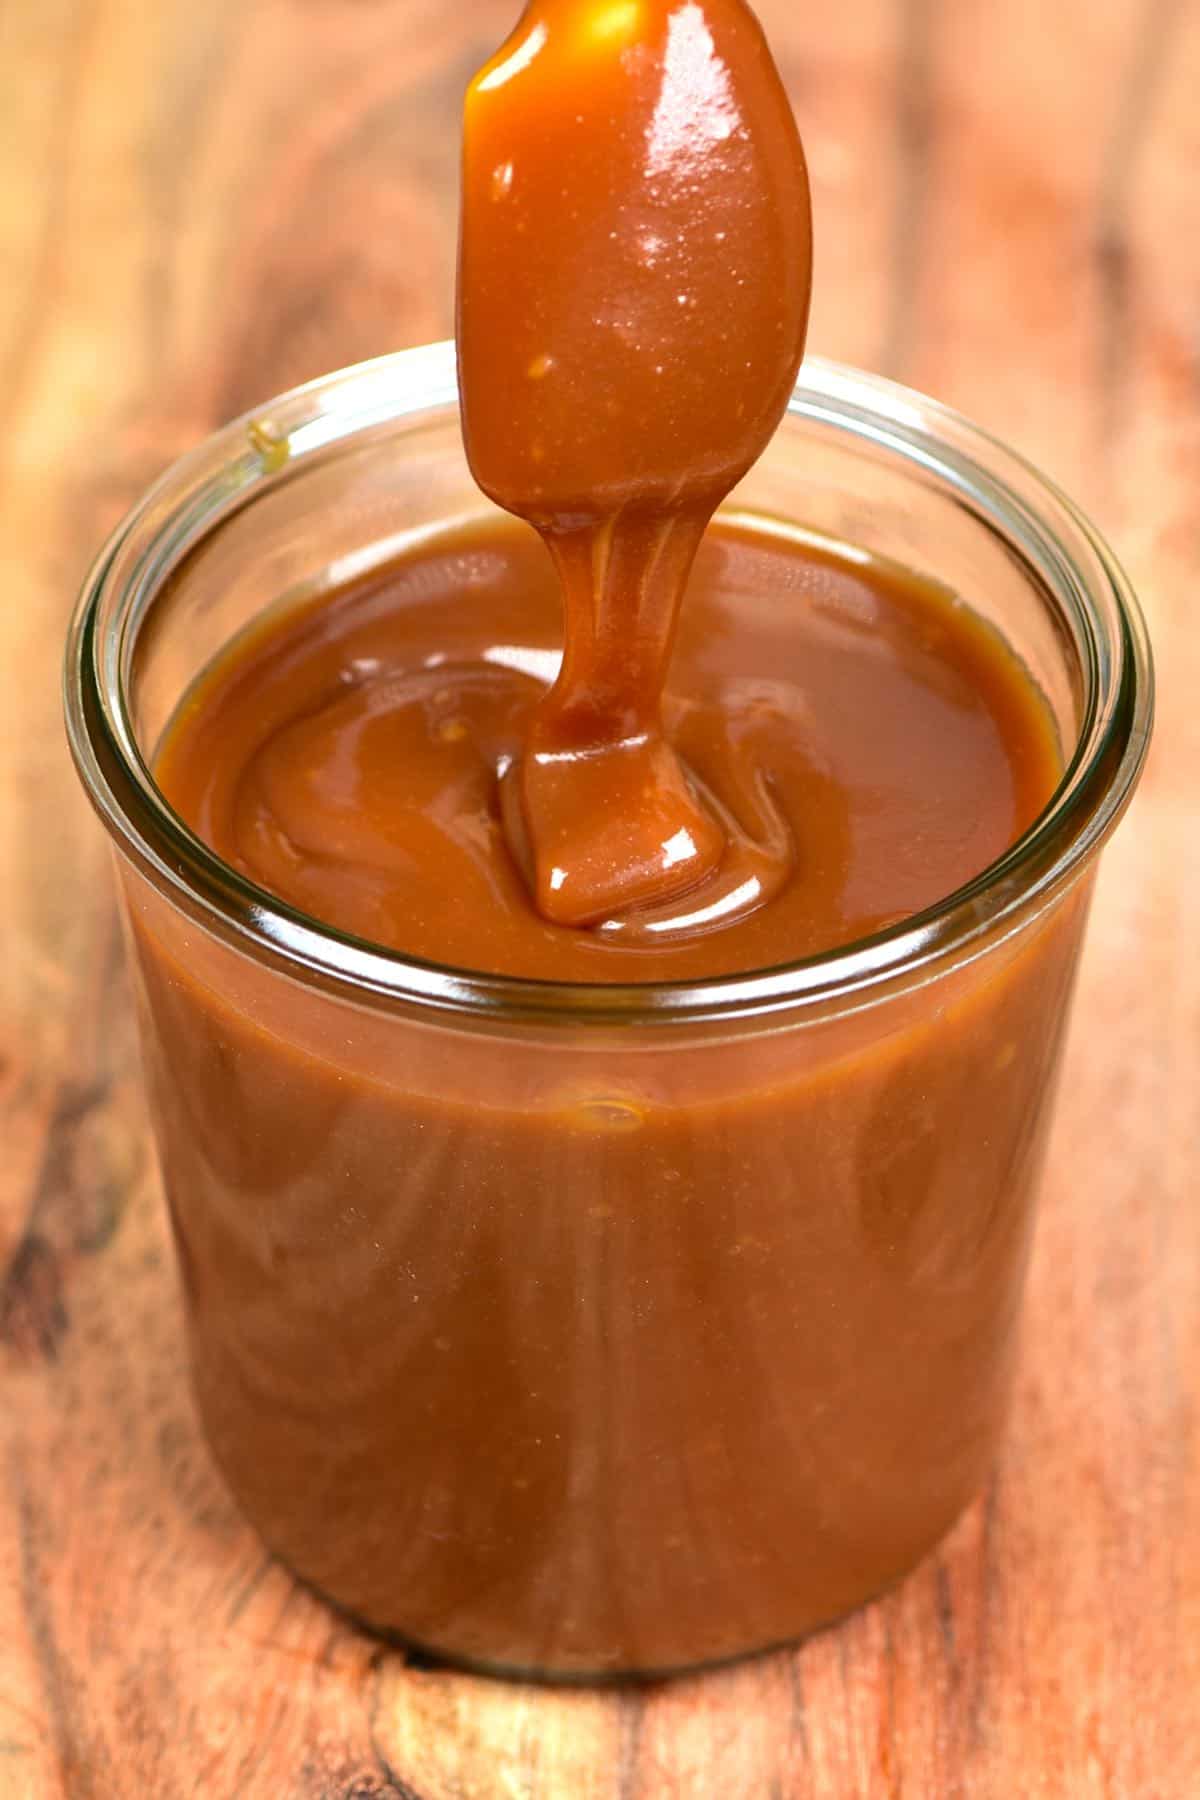 How To Make Homemade Caramel Sauce (+ Tips and Flavor Options)